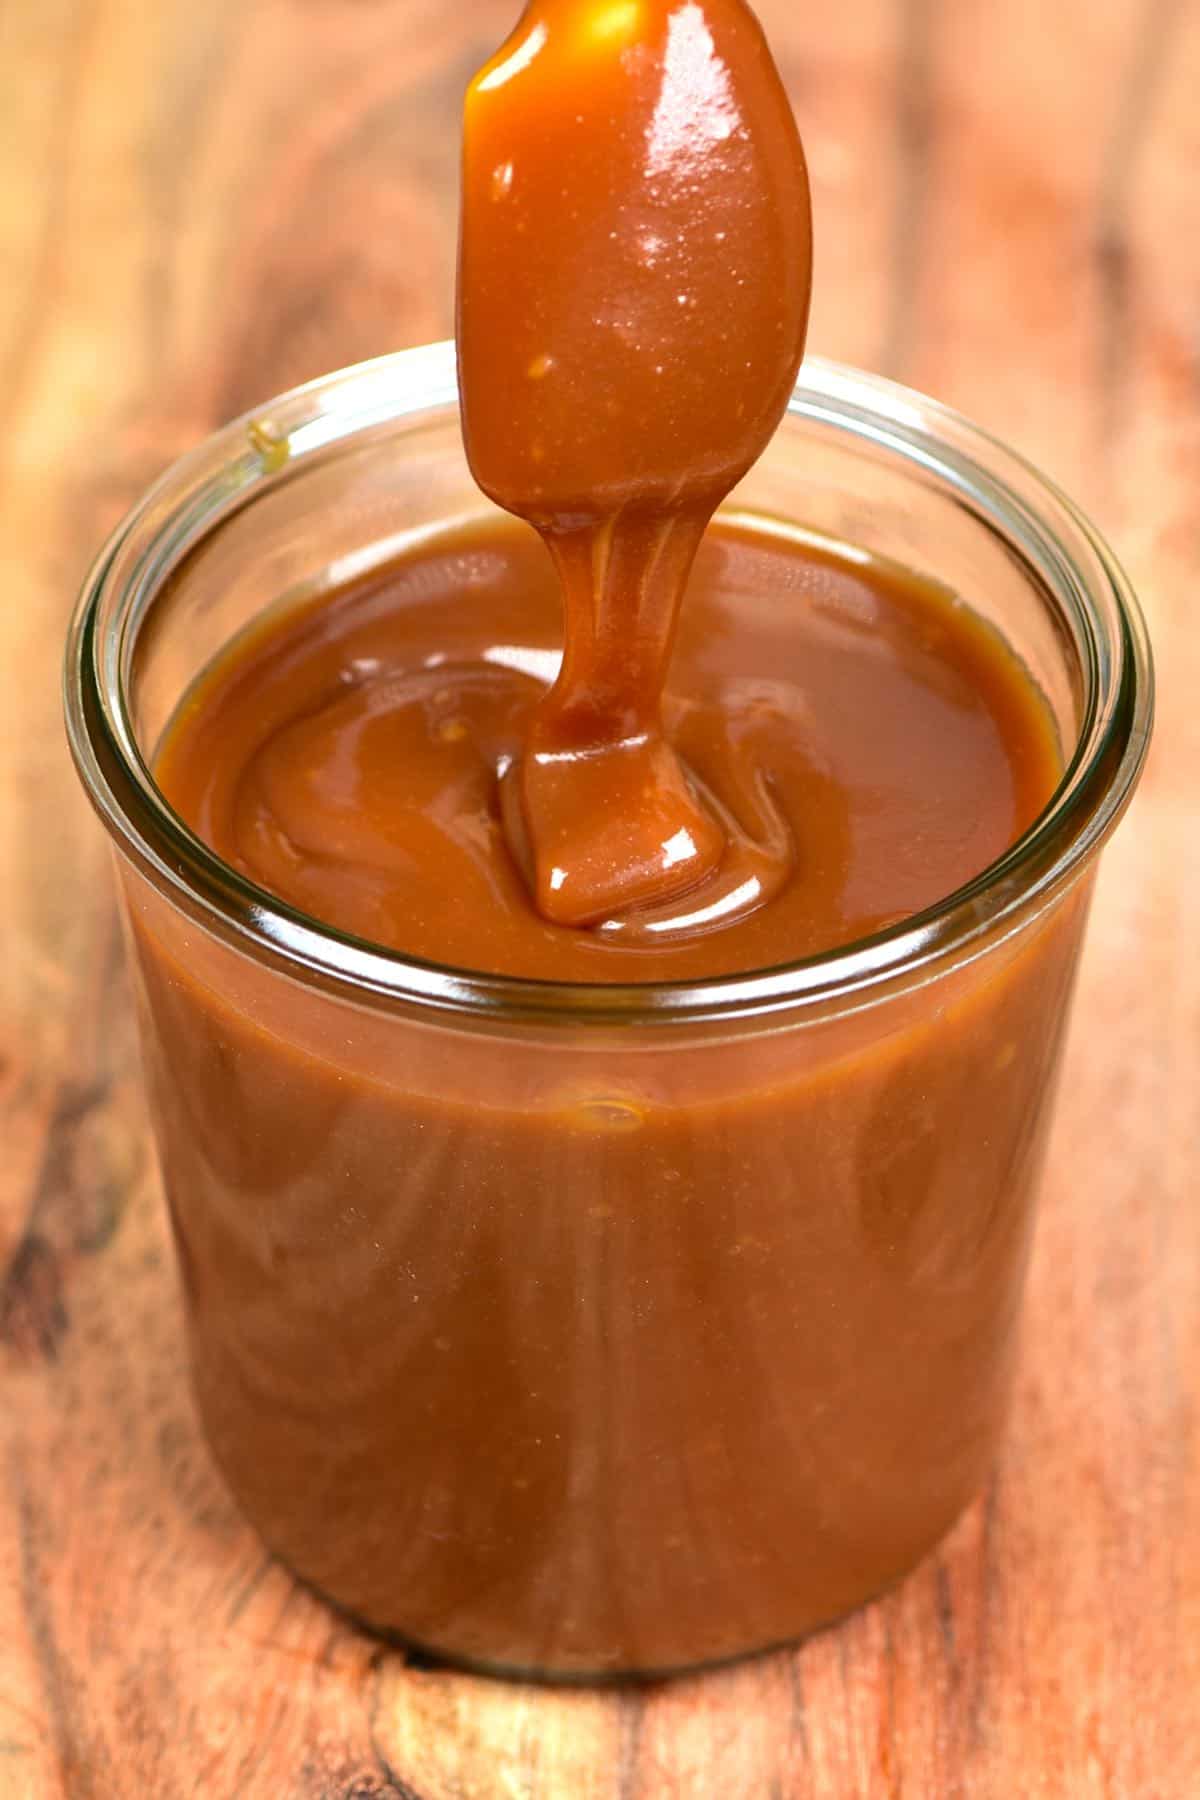 How To Make Homemade Caramel Sauce (+ Tips and Flavor Options)